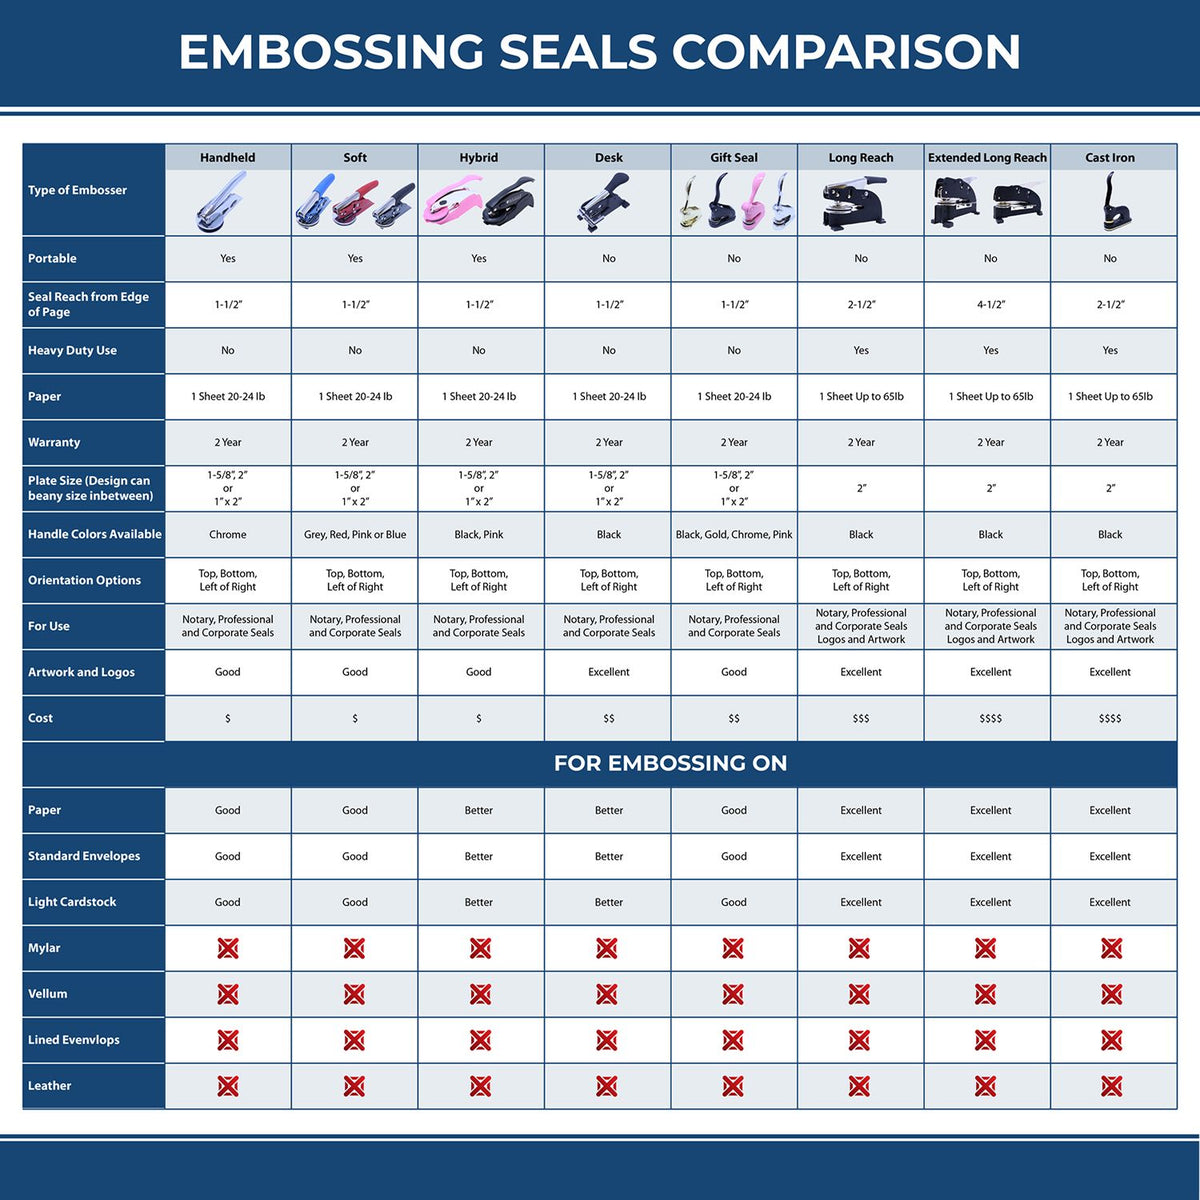 A comparison chart for the different types of mount models available for the Extended Long Reach Georgia Architect Seal Embosser.